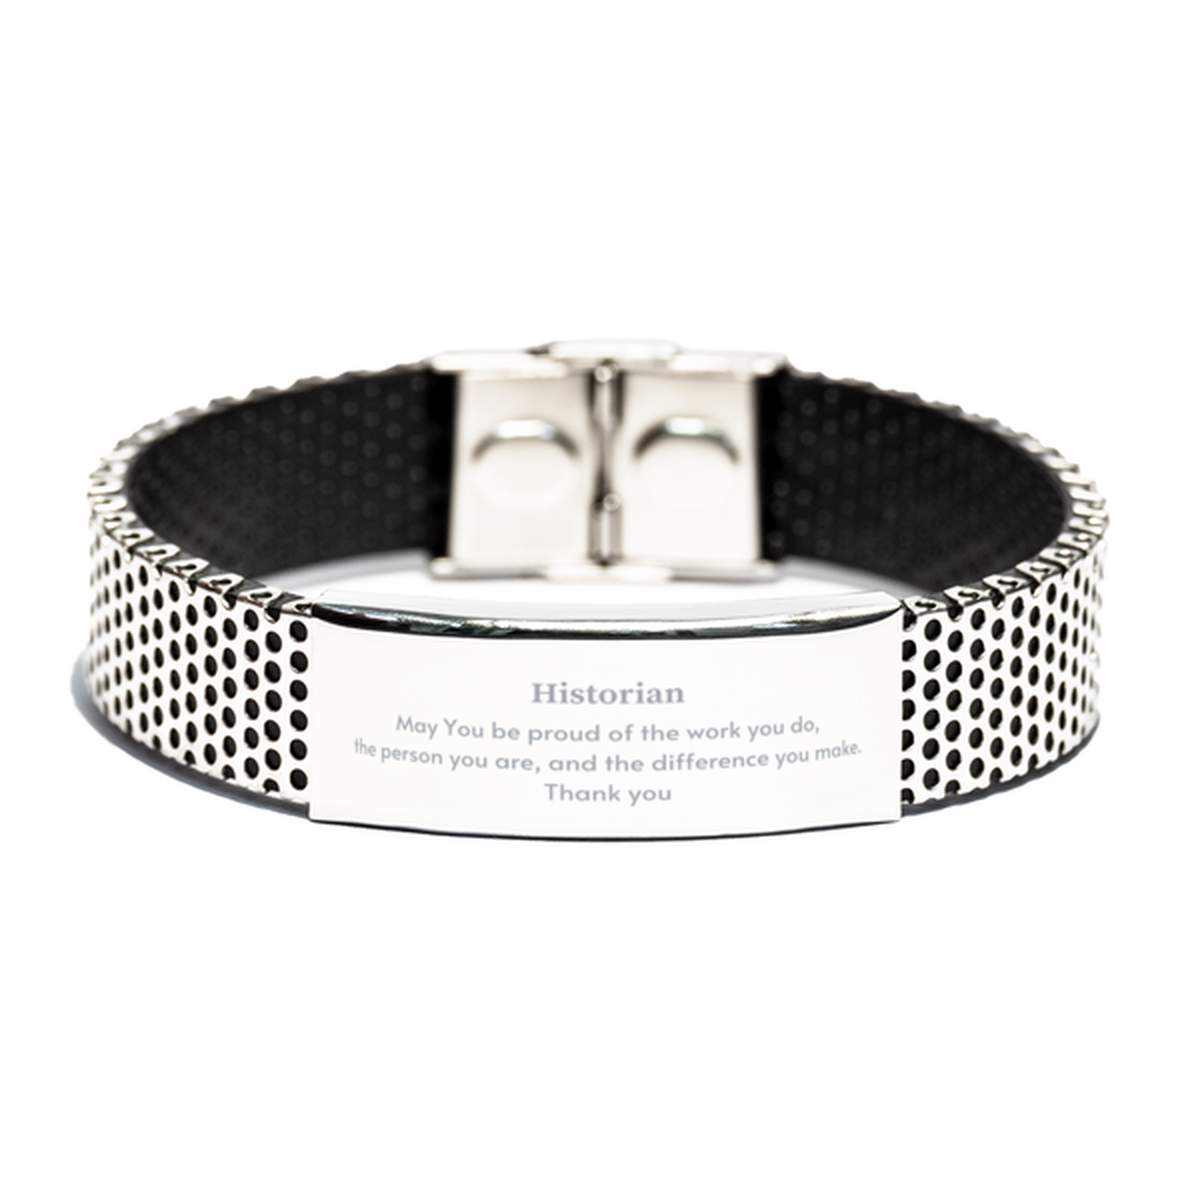 Heartwarming Stainless Steel Bracelet Retirement Coworkers Gifts for Historian, Historian May You be proud of the work you do, the person you are Gifts for Boss Men Women Friends